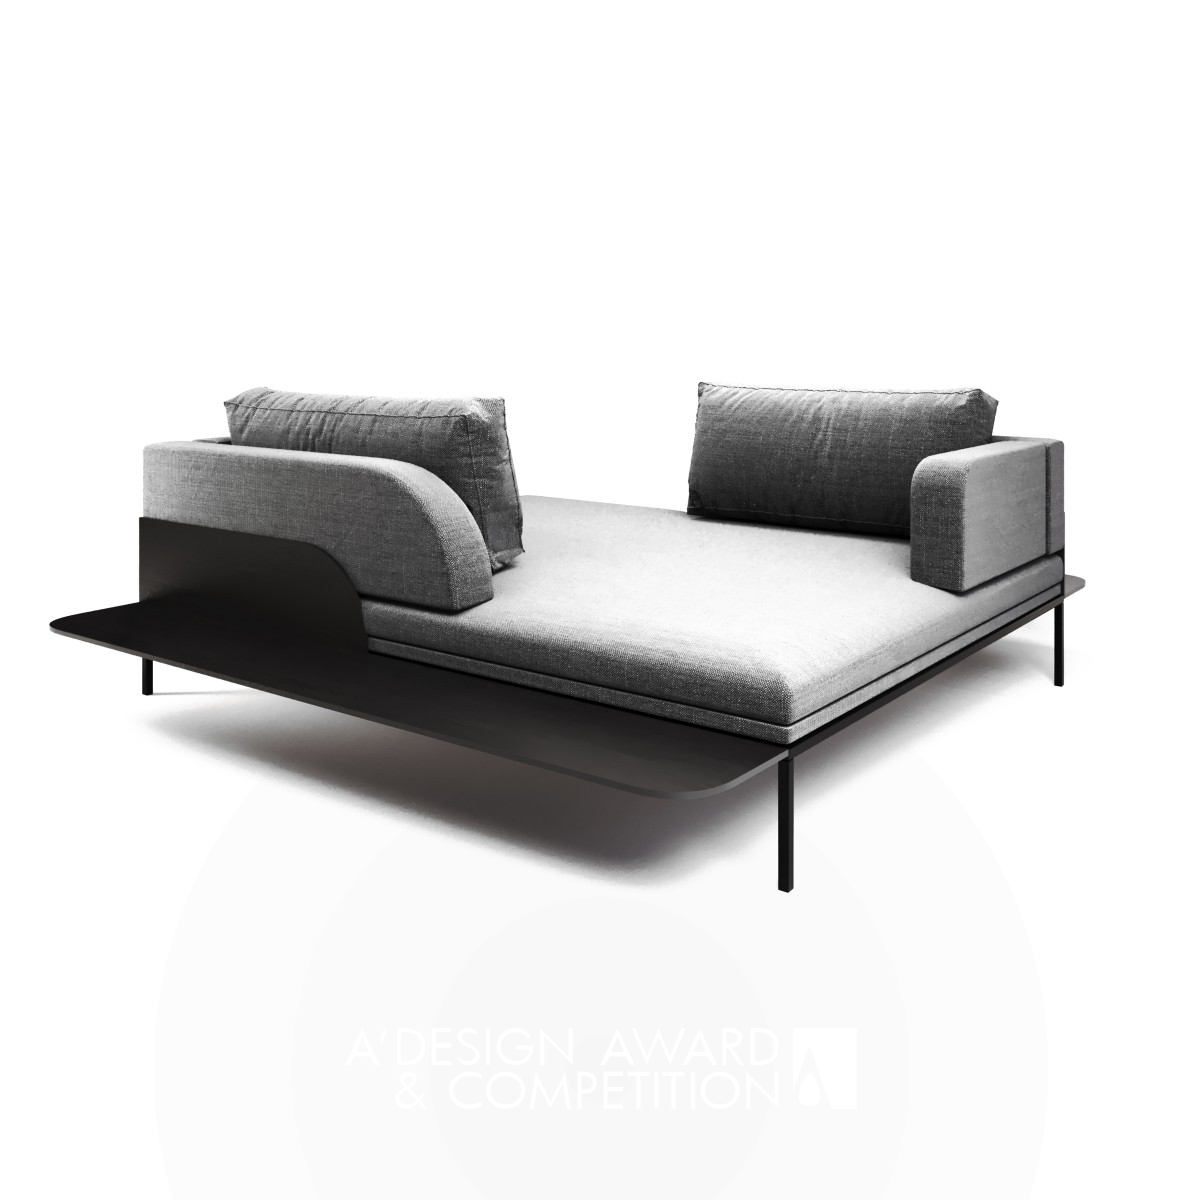 Friends Sofa: A Unique and Friendly Approach to Relaxation